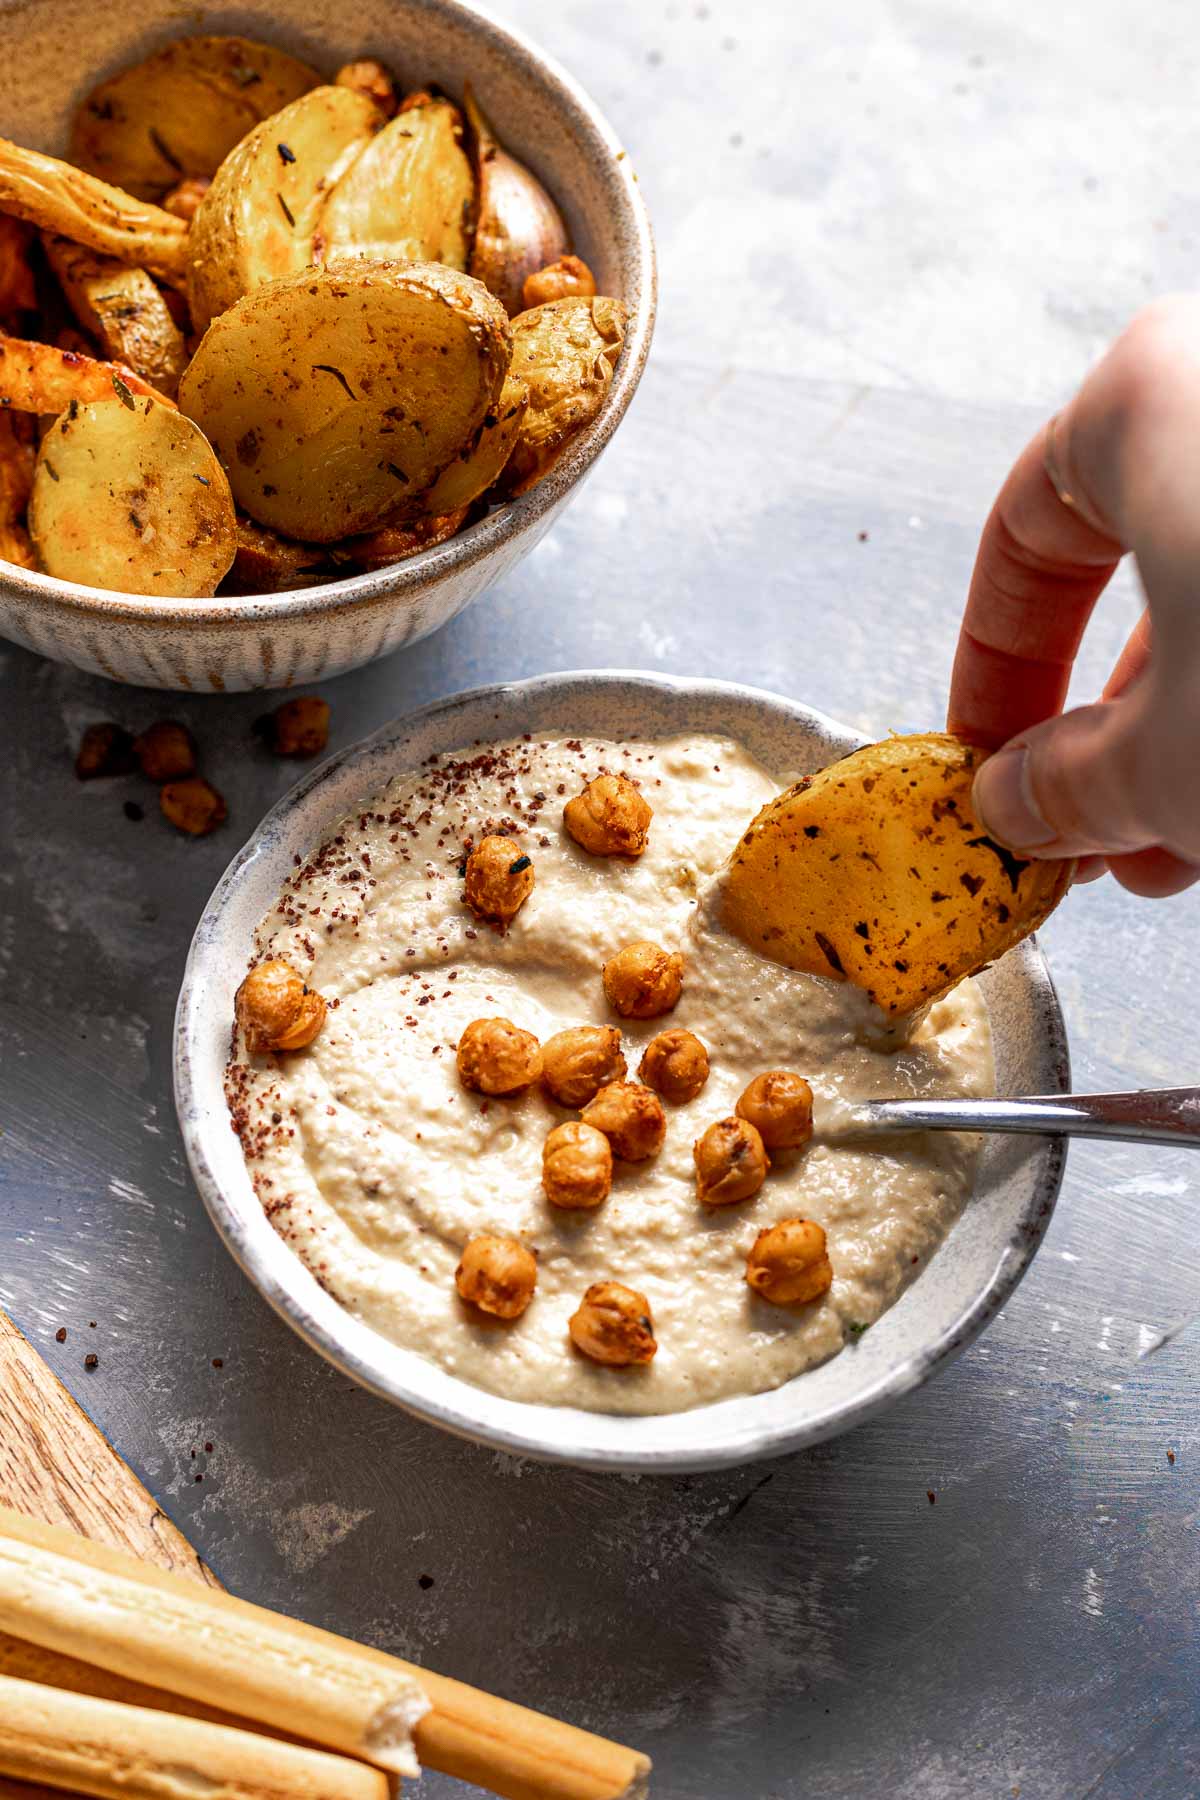 A hand reaching out to dip a spicy potato wedge into a bowl of hummus.